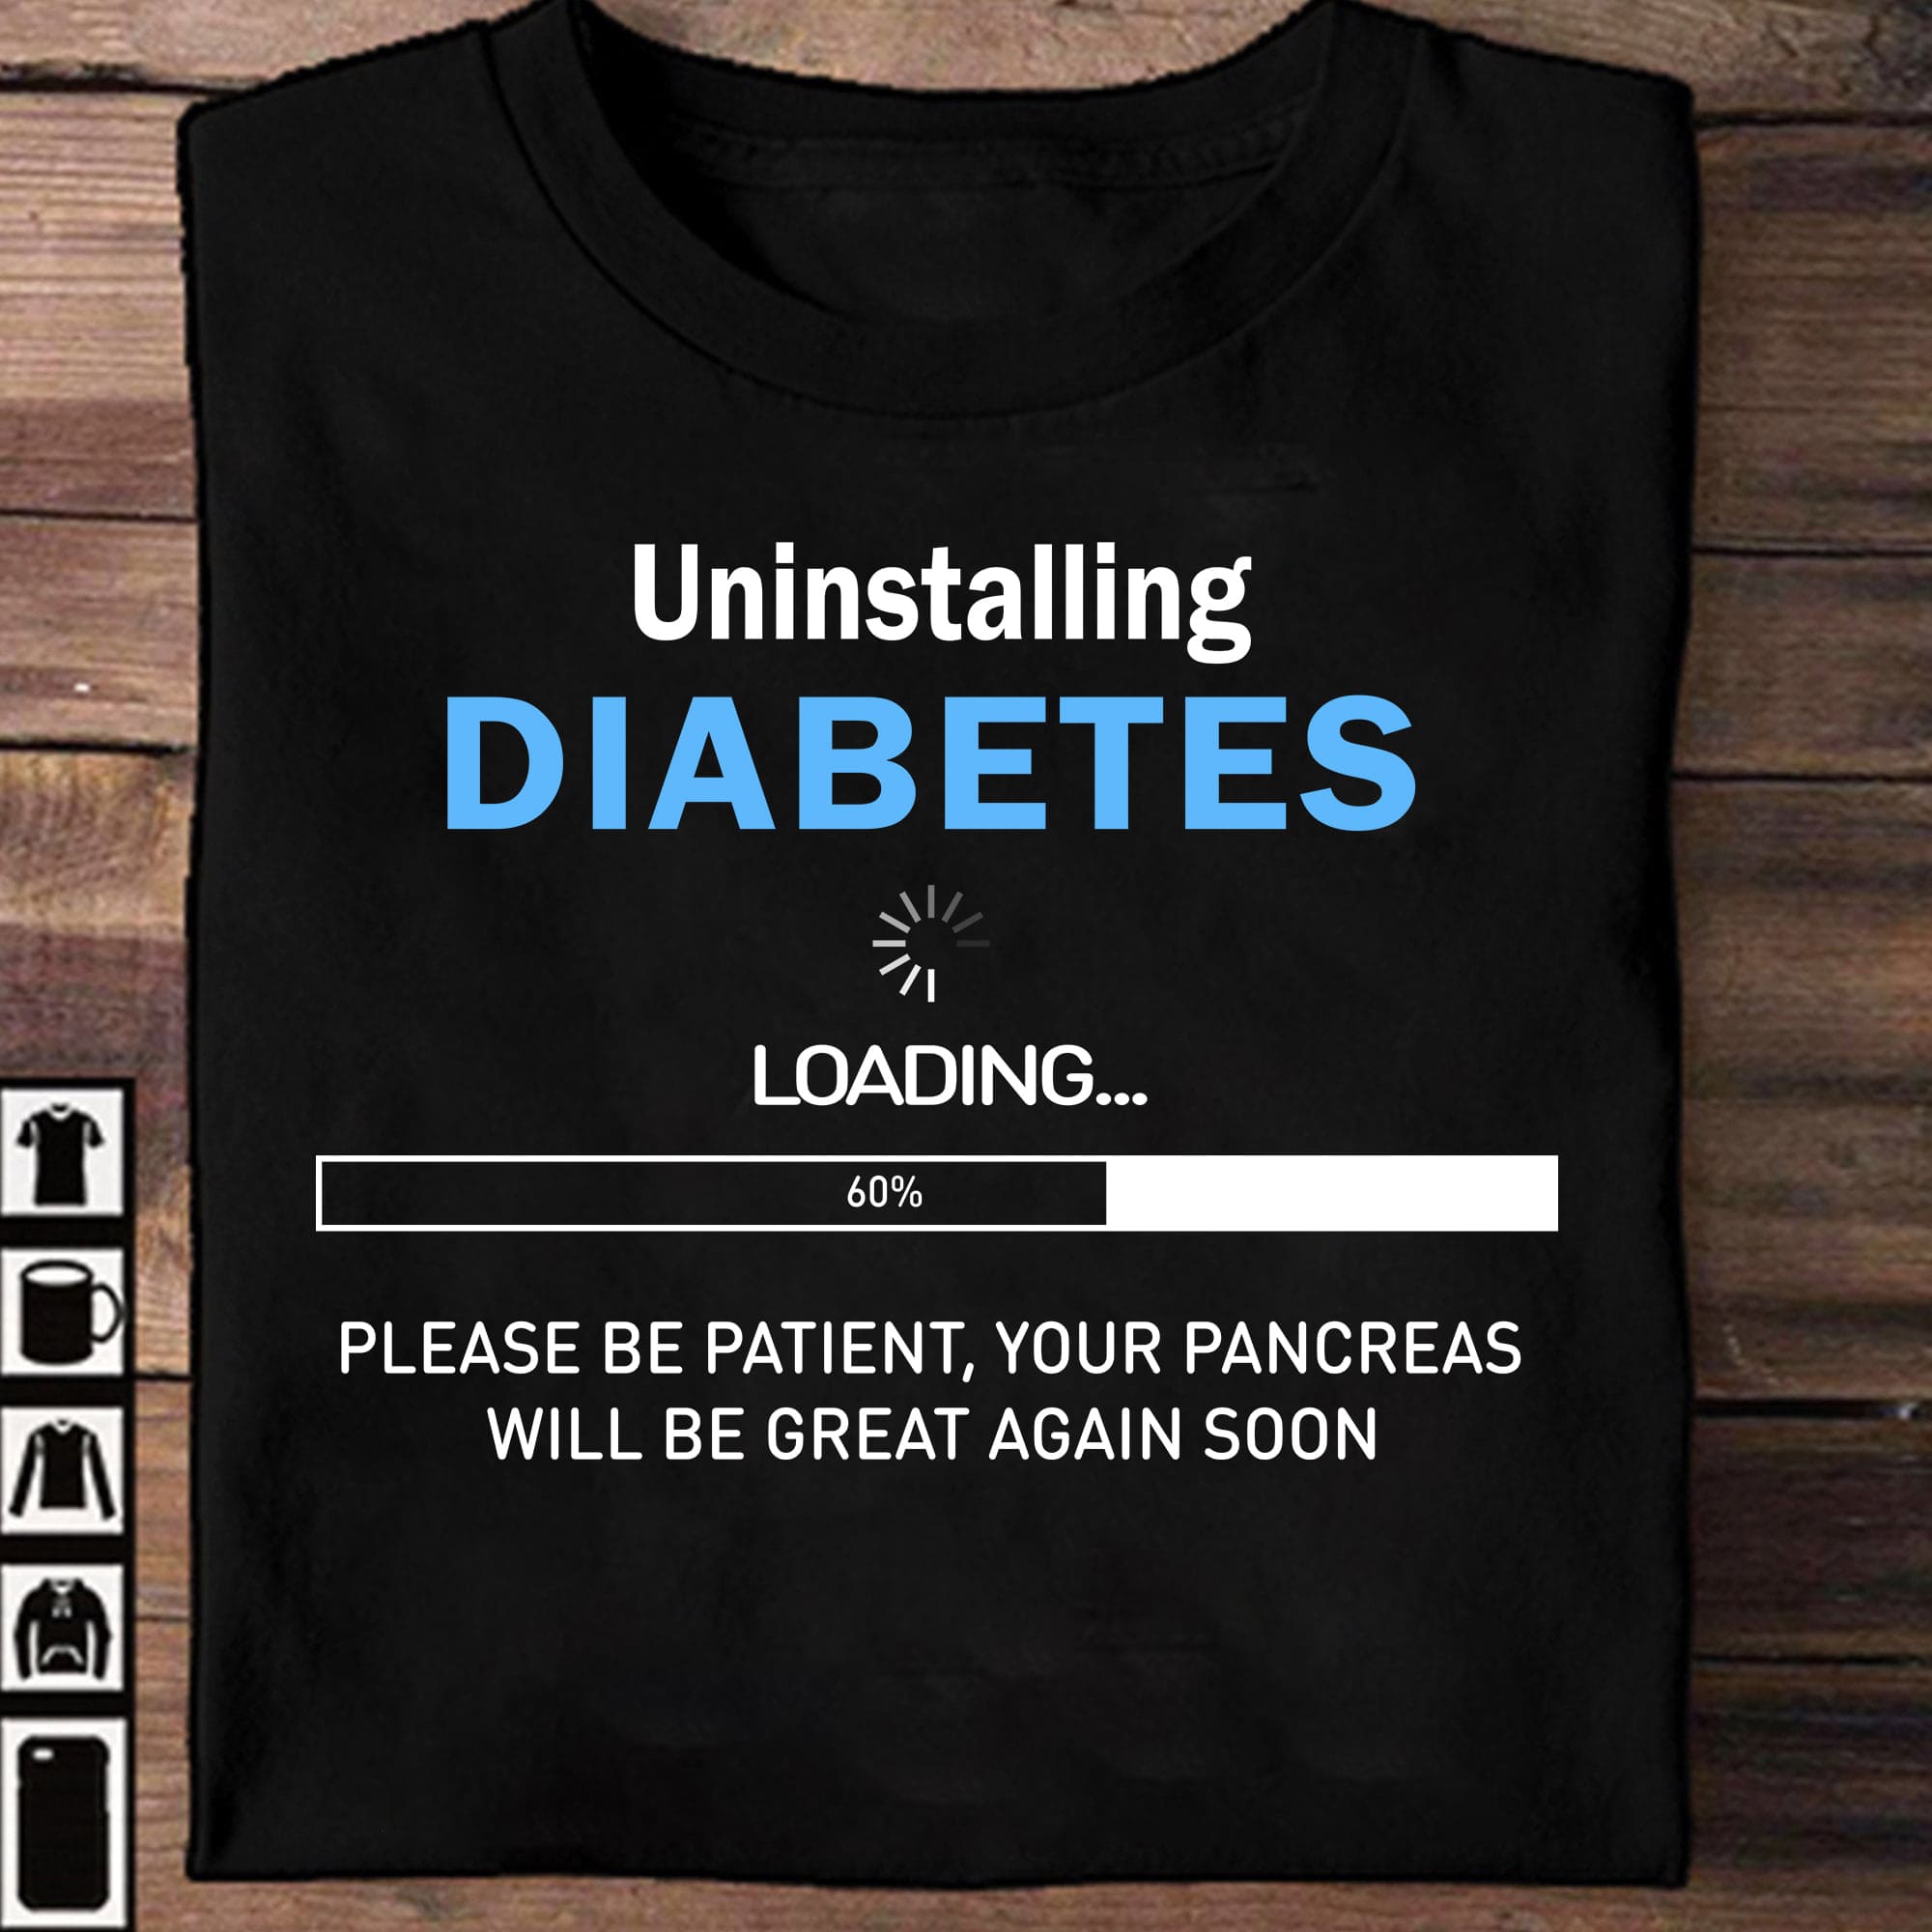 Diabetes Loading - Uninstalling diabetes loading please be patient your pancreas will be great again soon